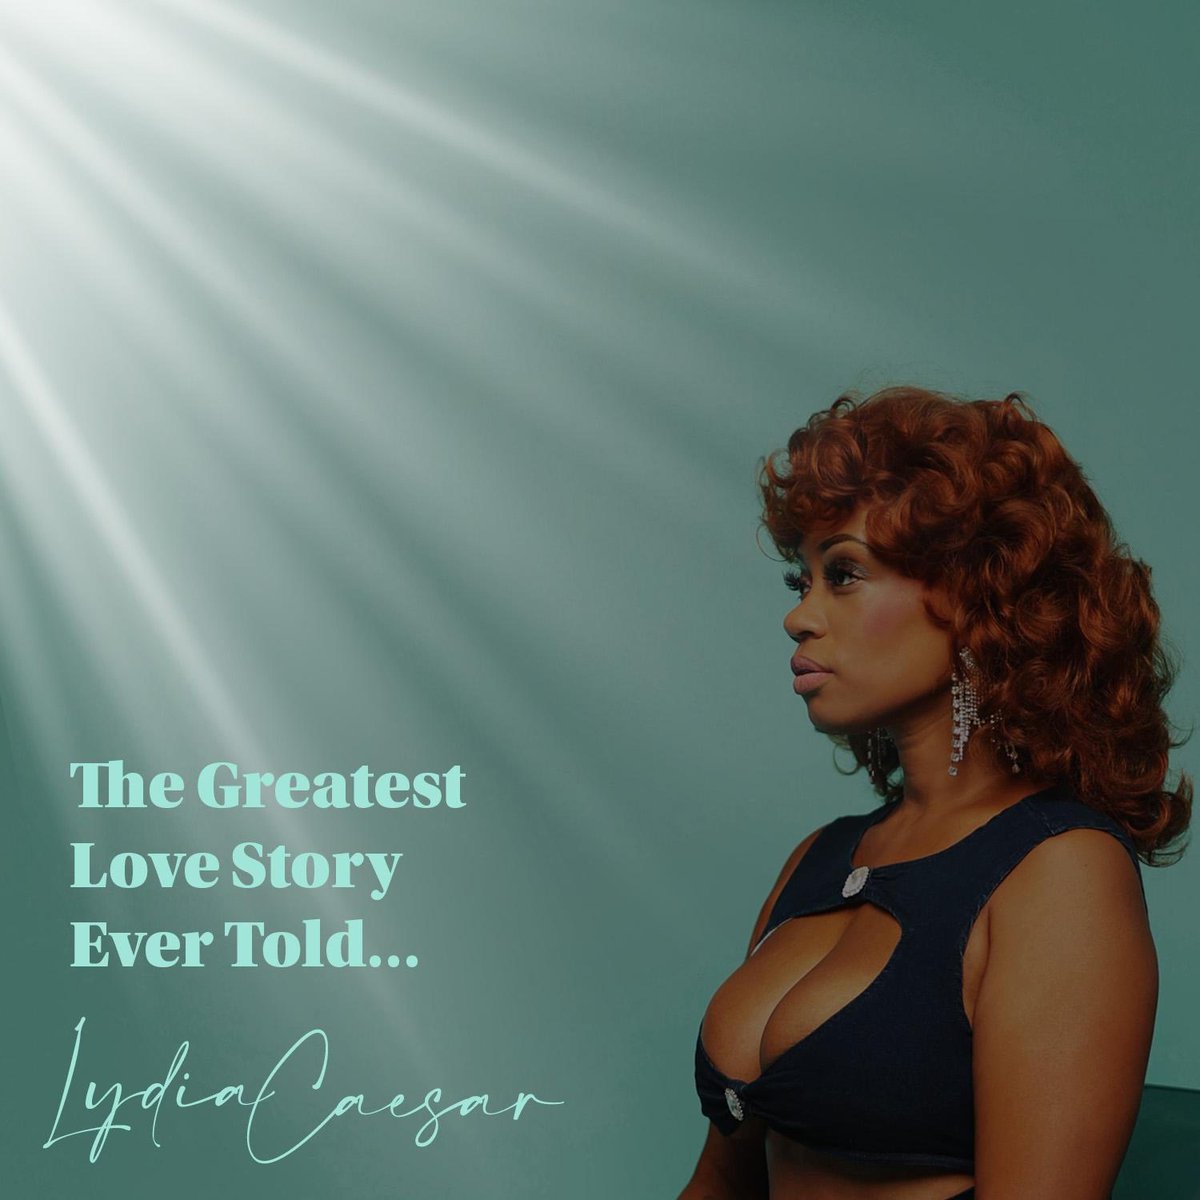 “The Greatest Love Story Ever Told” by @LydiaCaesar mastered here! 

Mixed by @wayne_wav
Mastered by @niccdep
Produced by @Phinestro @JUNY_MAG

#lydiacaesar #mastering #masteringengineer #masteringstudio #milliondollarsnare #SendItToDep